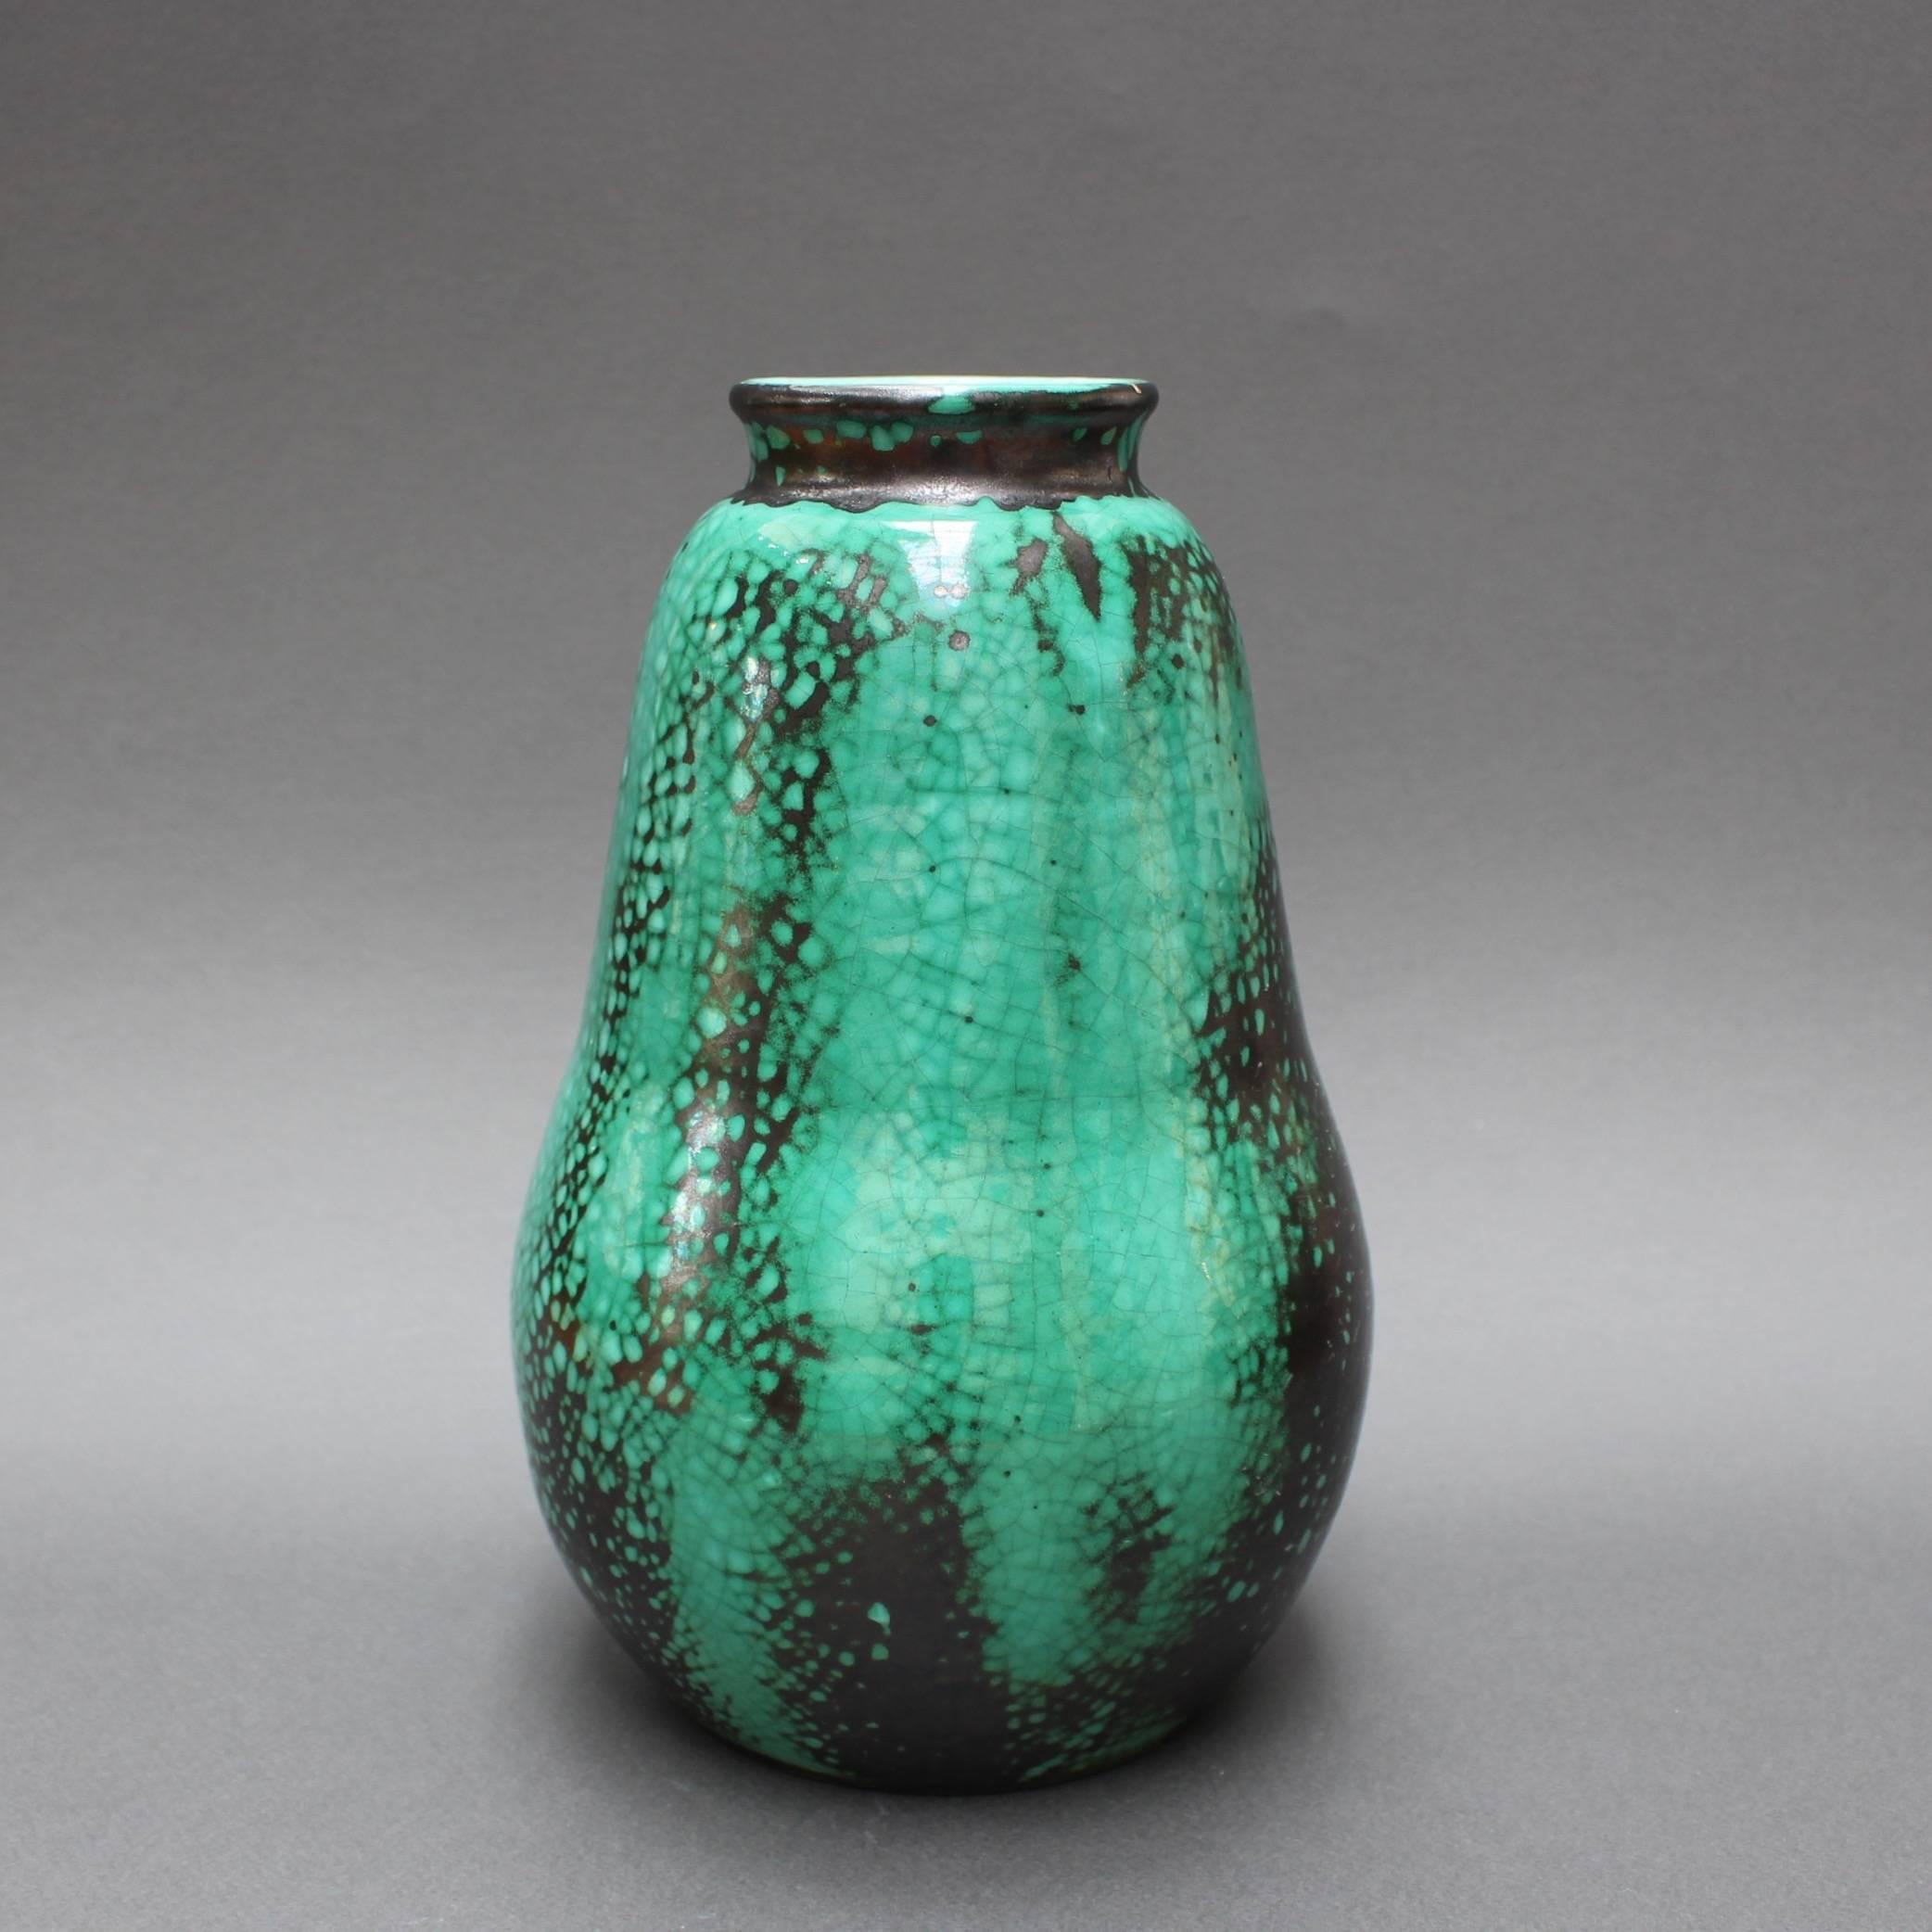 Pear-shaped, black and green crackle-glazed ceramic Primavera vase by C.A.B. (Céramique d’art de Bordeaux) for Printemps (circa 1930s). The sensuously curved vase effortlessly becomes the focal point of any room's décor. The green colored base is